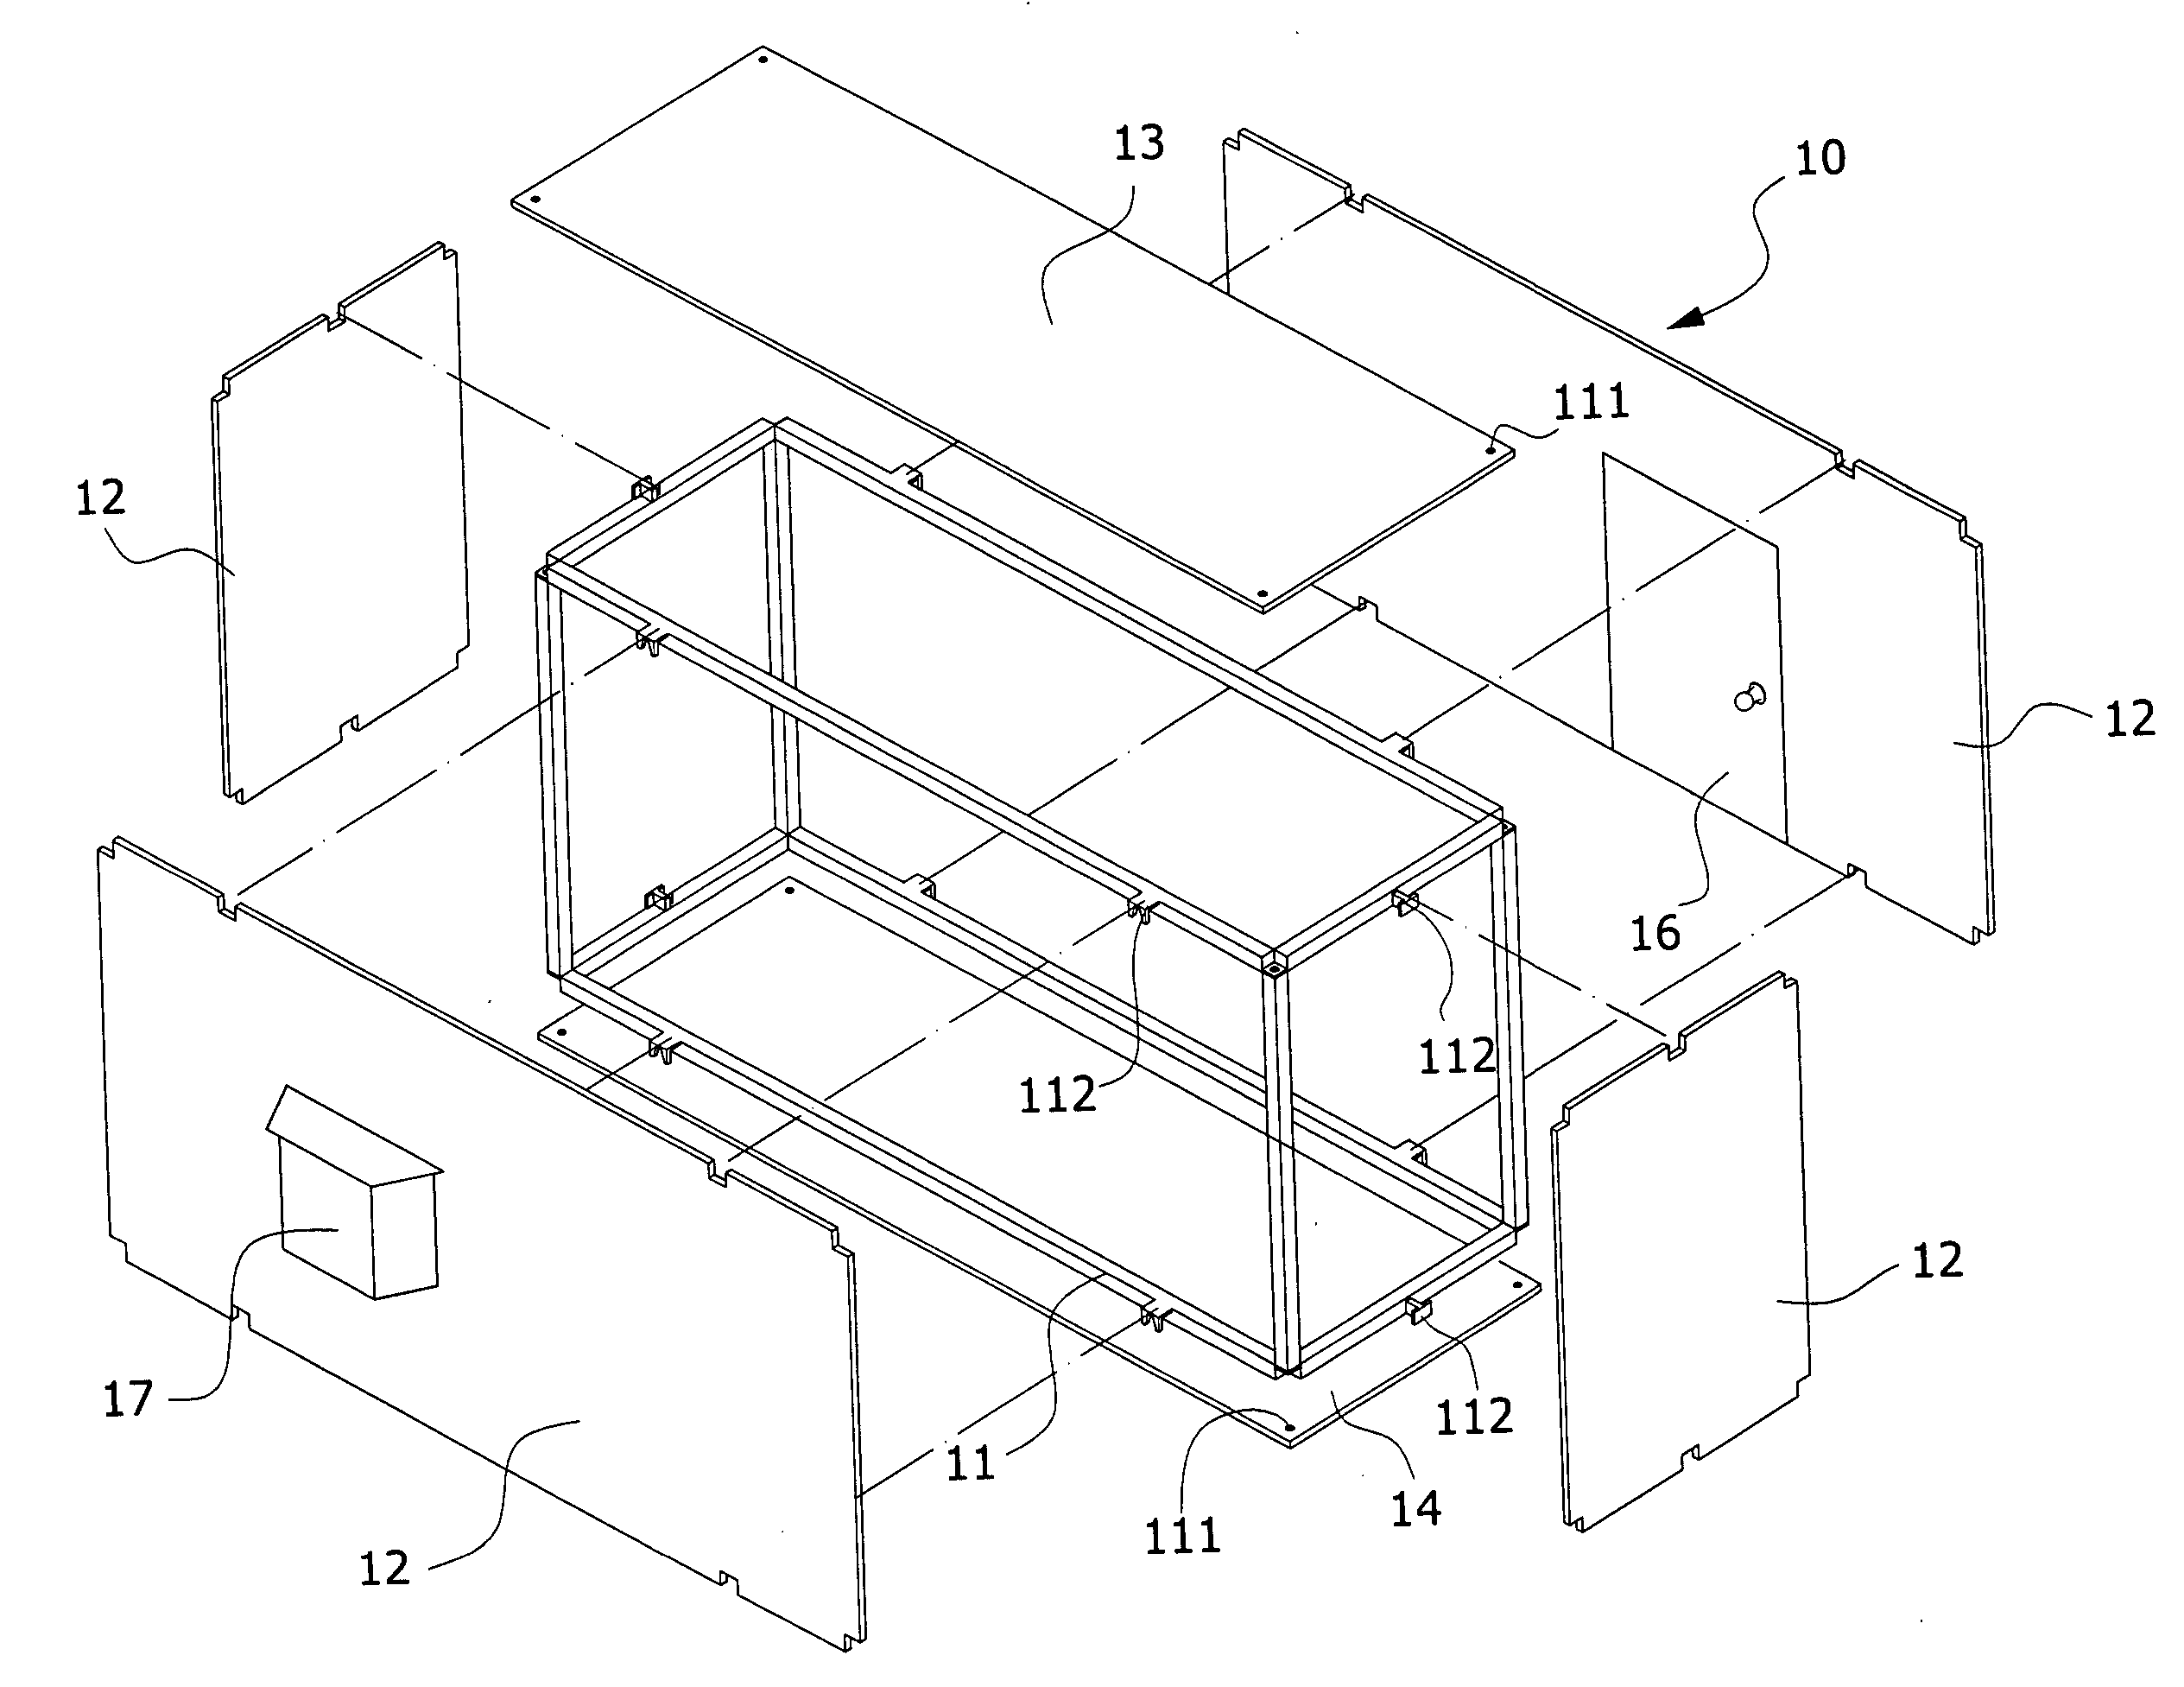 Combinational housing structure